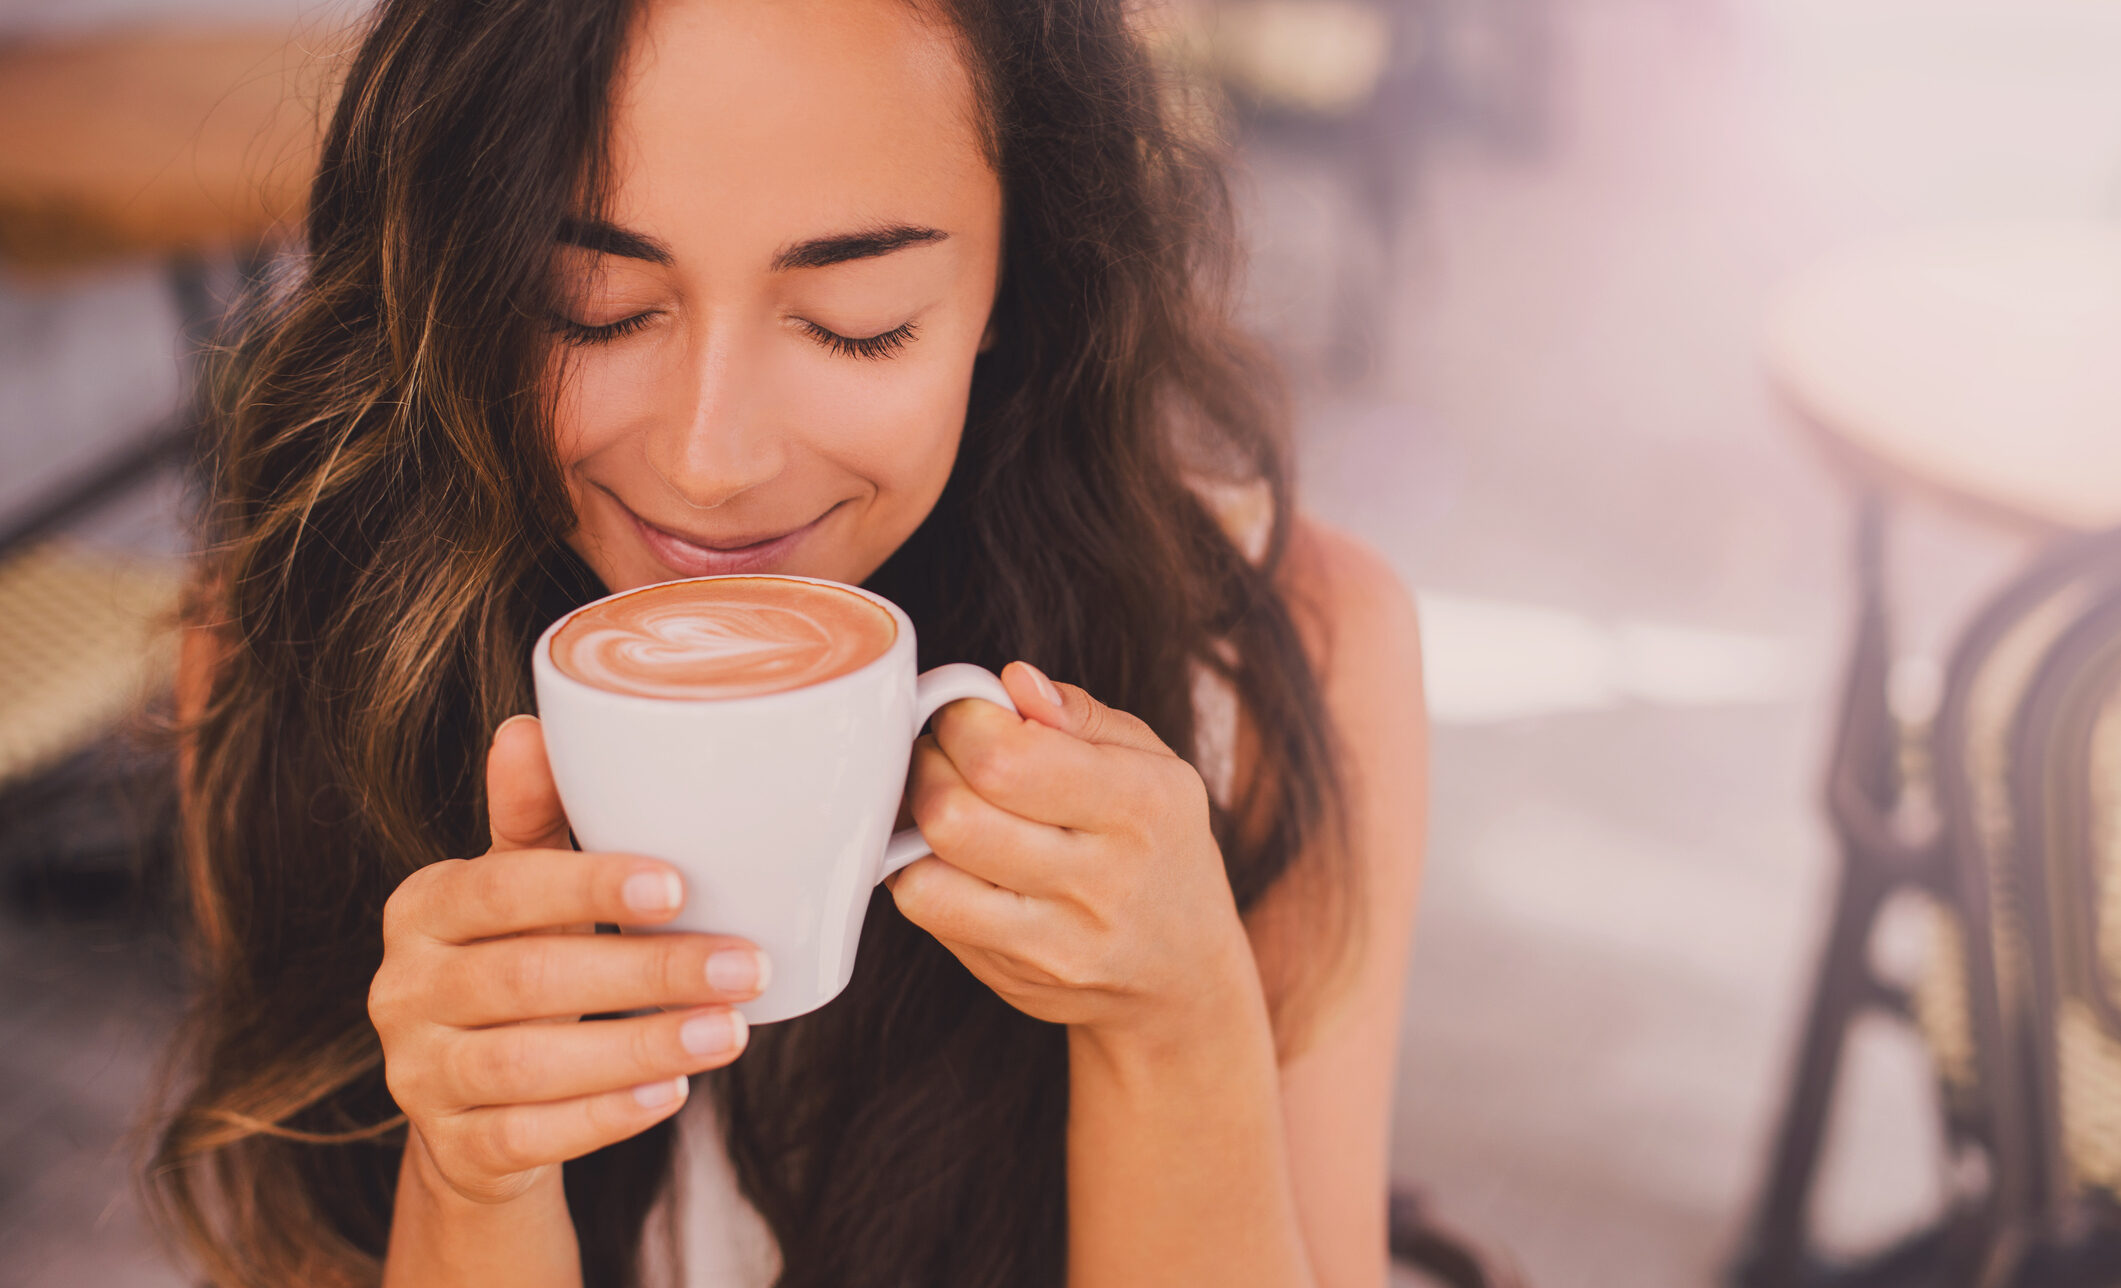 Young beautiful happy woman with long curly hair enjoying cappuccino in a street cafe